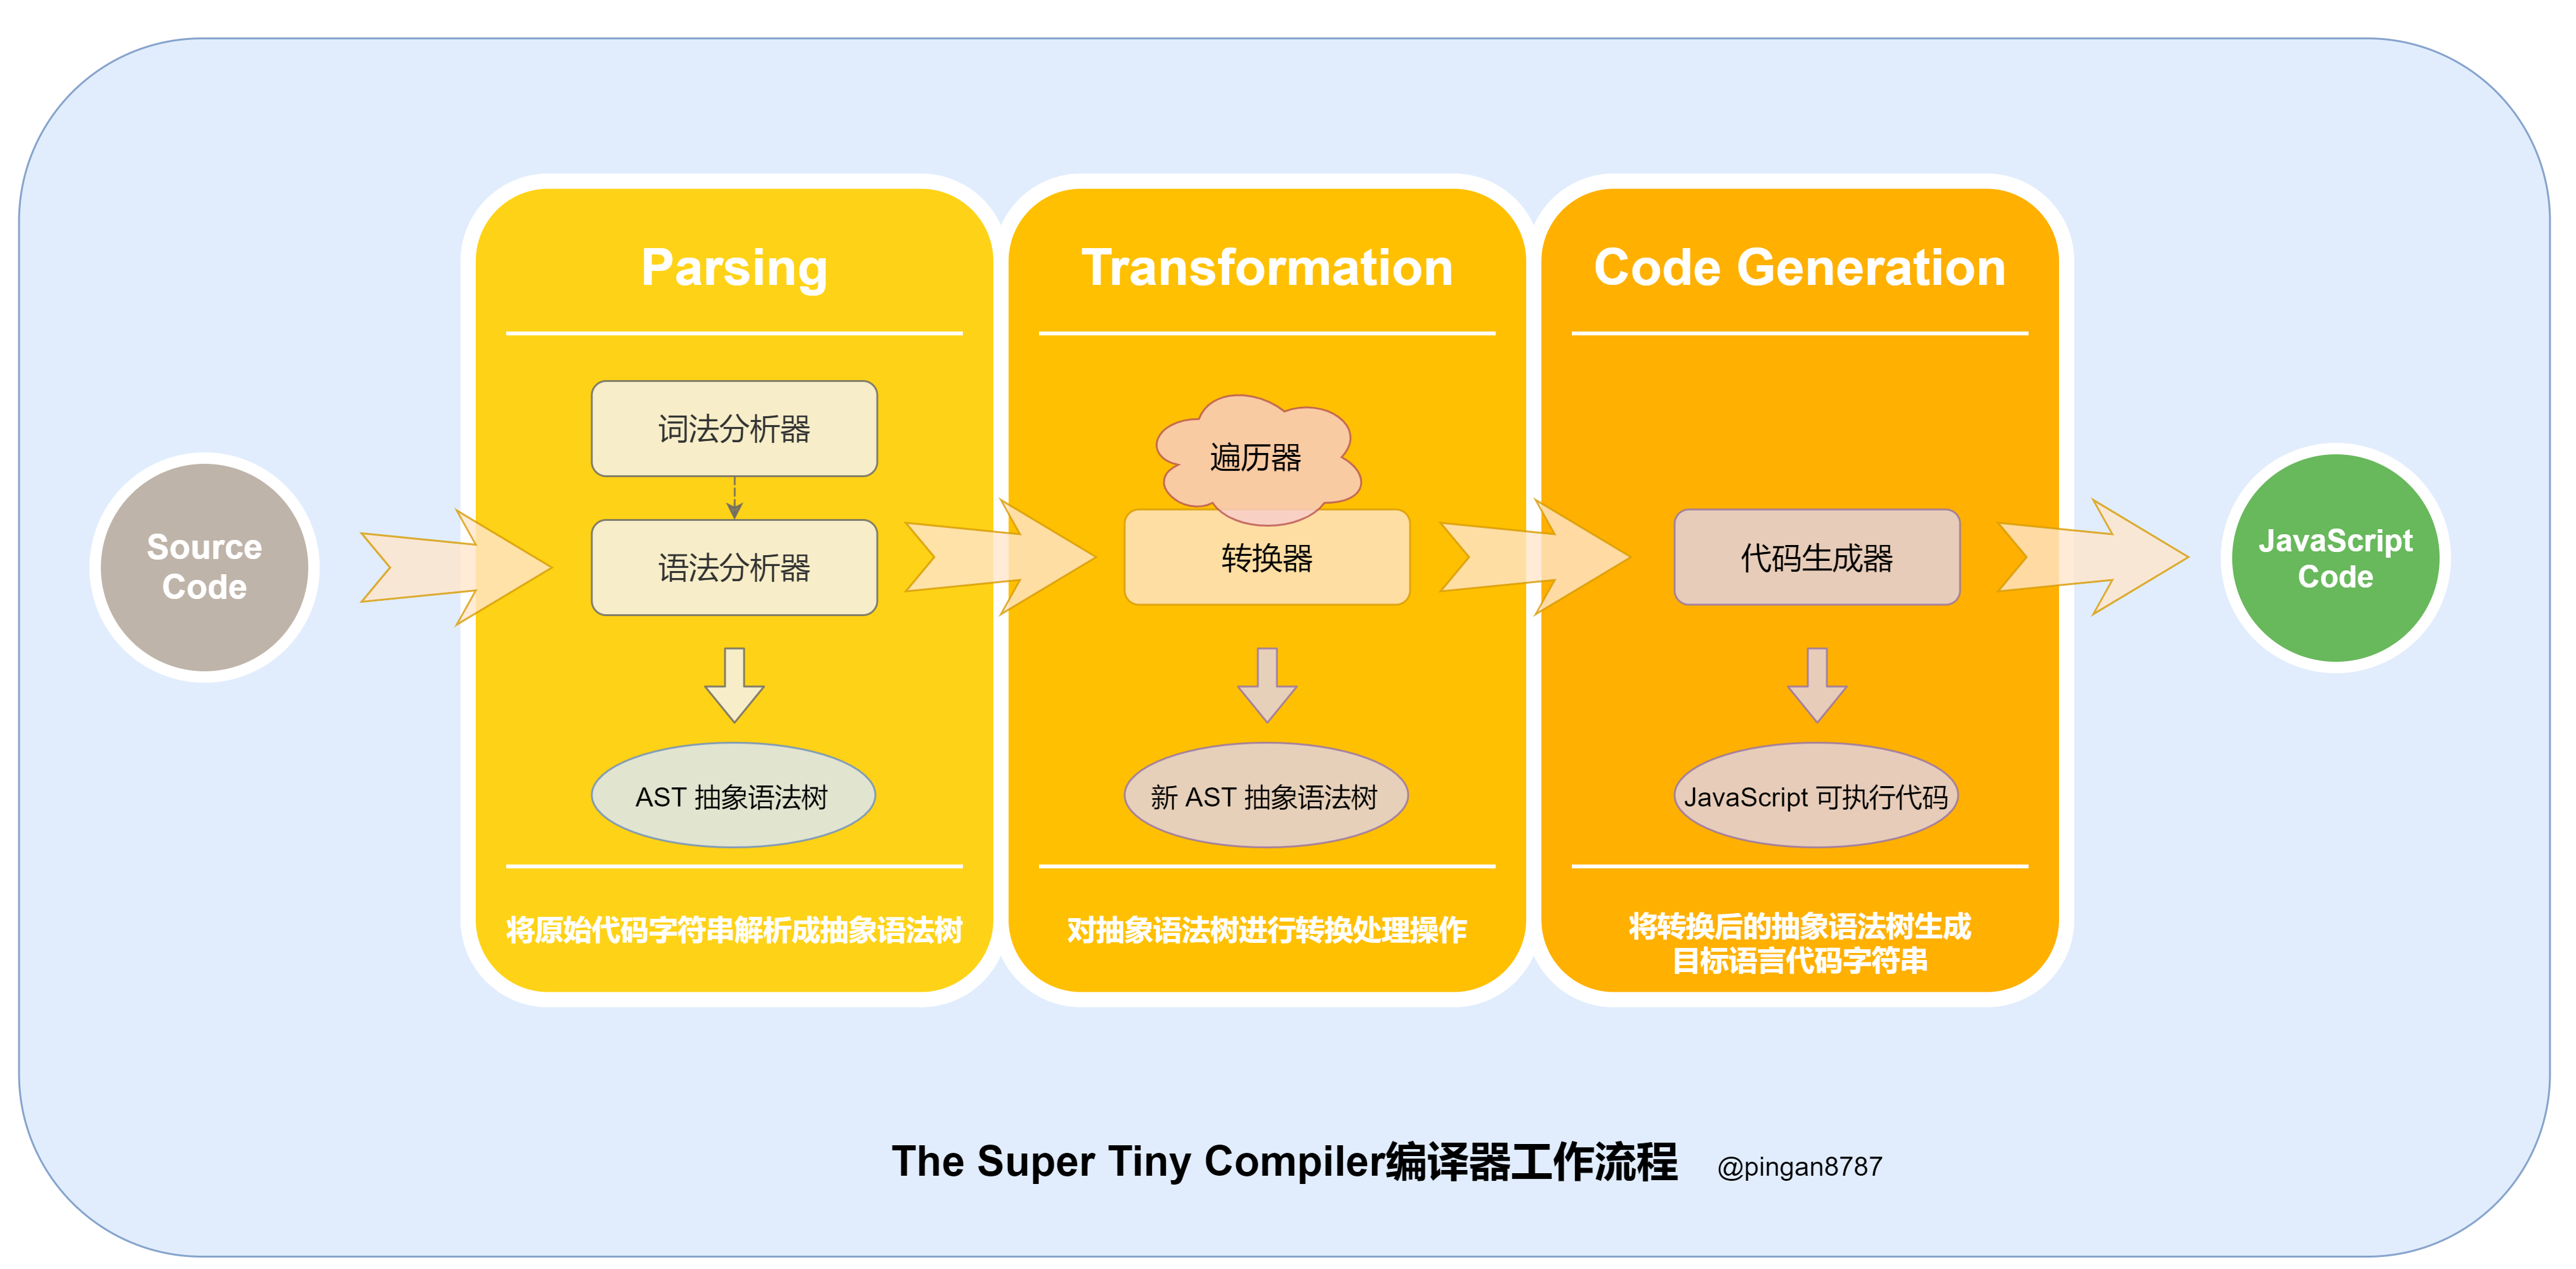 The Super Tiny Compiler编译器工作流程.png